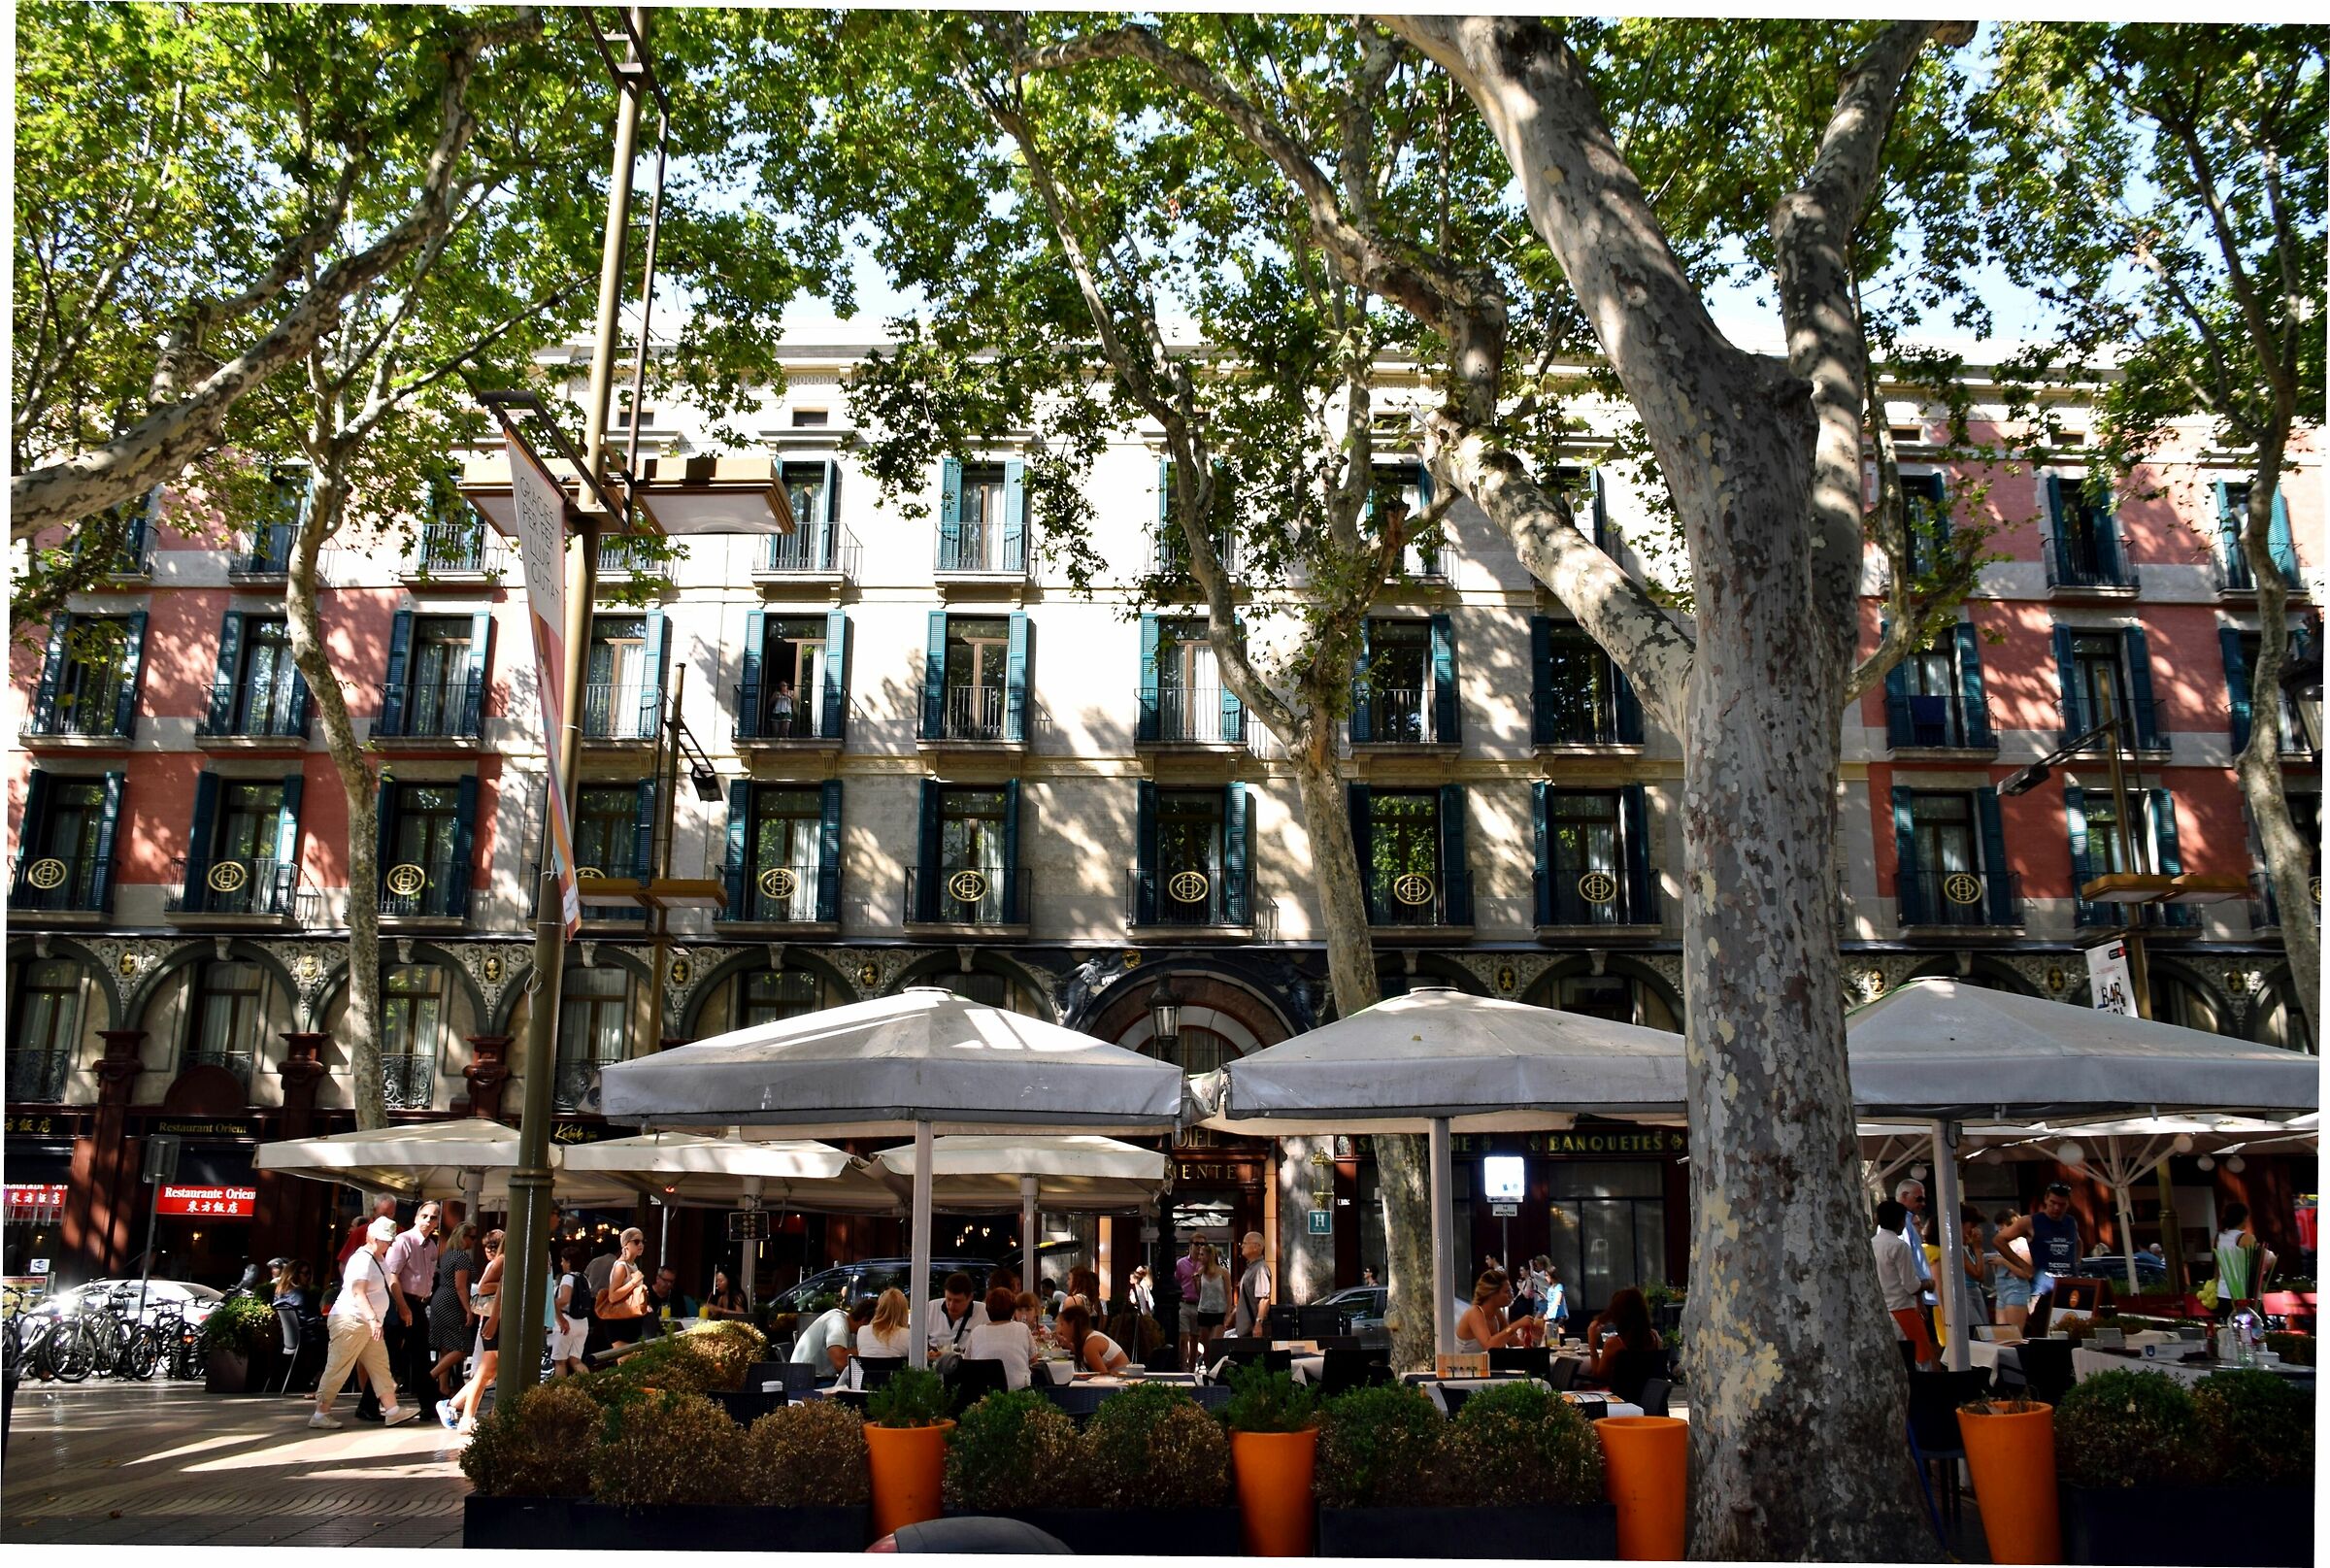 A carefree day on the Rambla!...